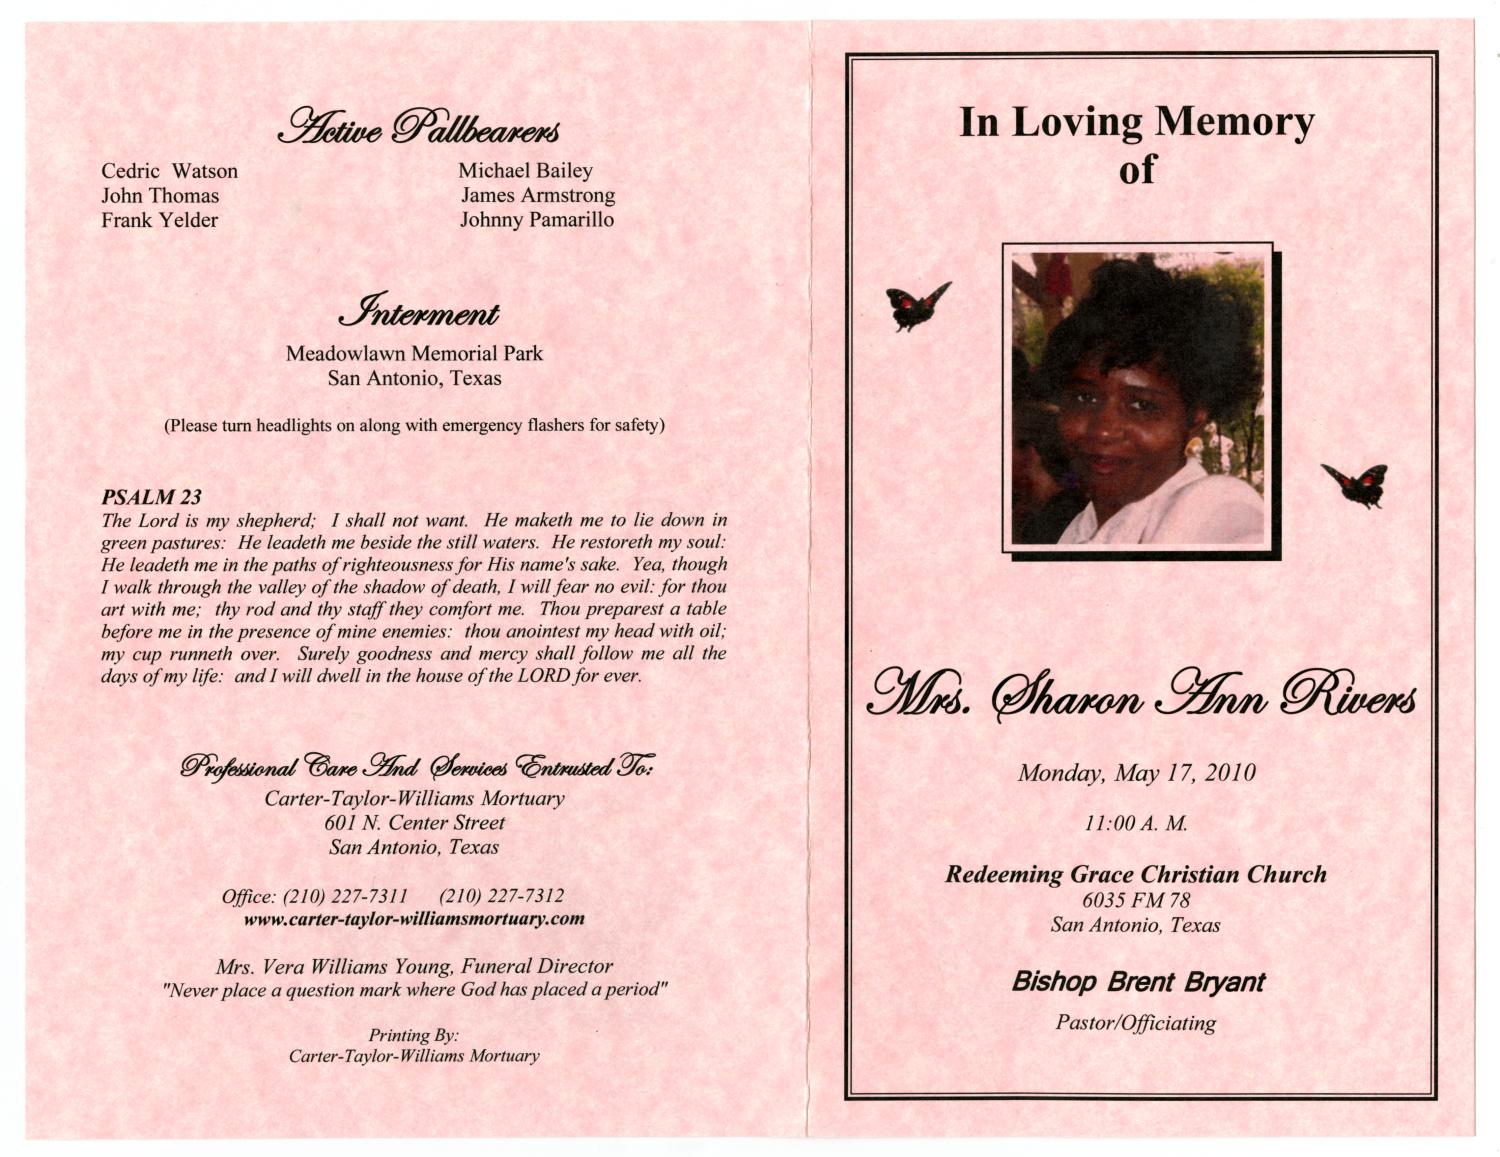 [Funeral Program for Sharon Ann Rivers, May 17, 2010]
                                                
                                                    [Sequence #]: 3 of 3
                                                